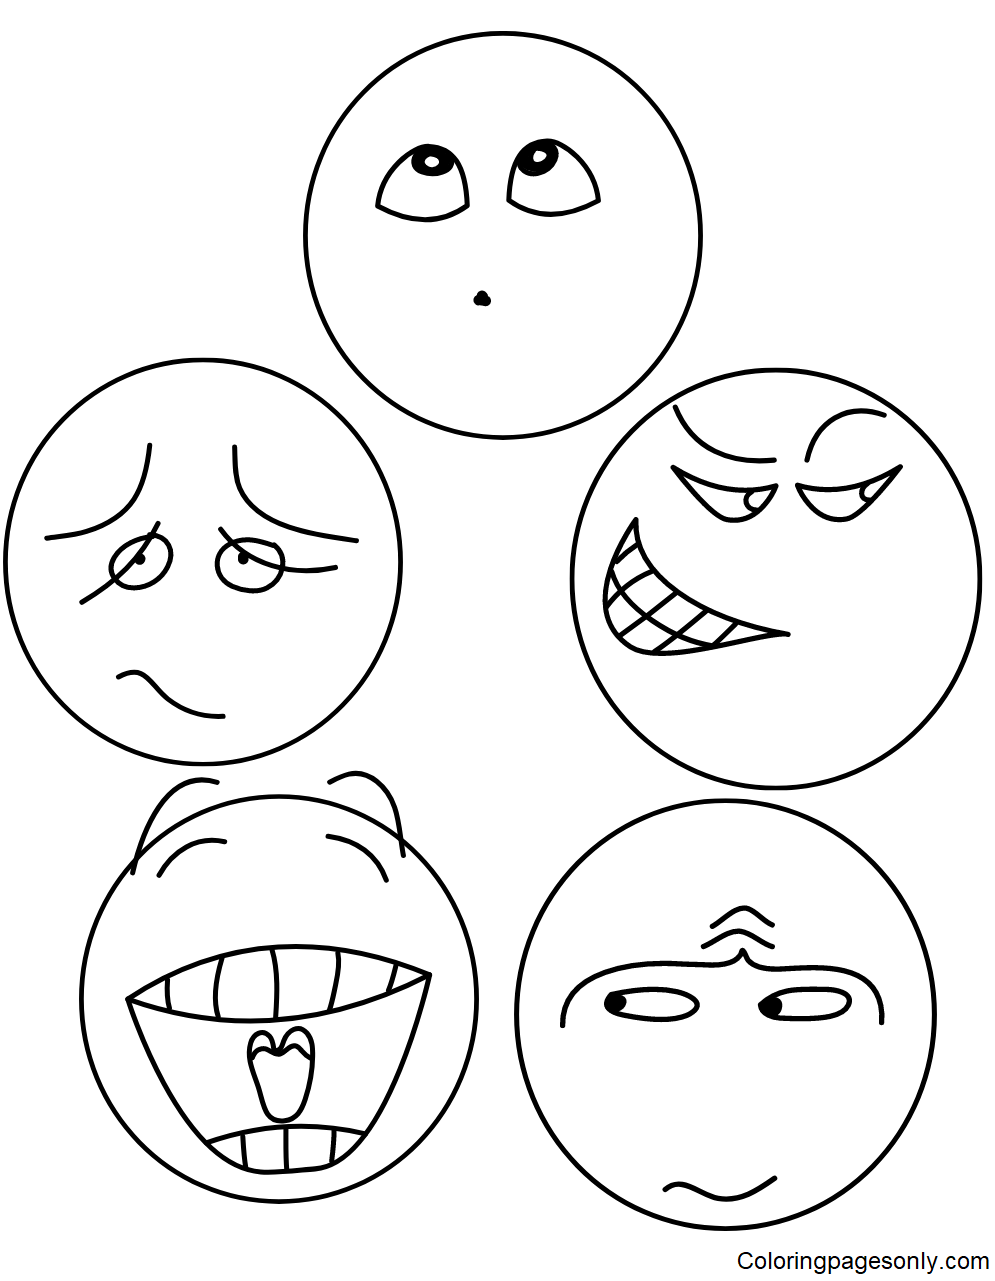 Printable Emotions Sheets Coloring Pages